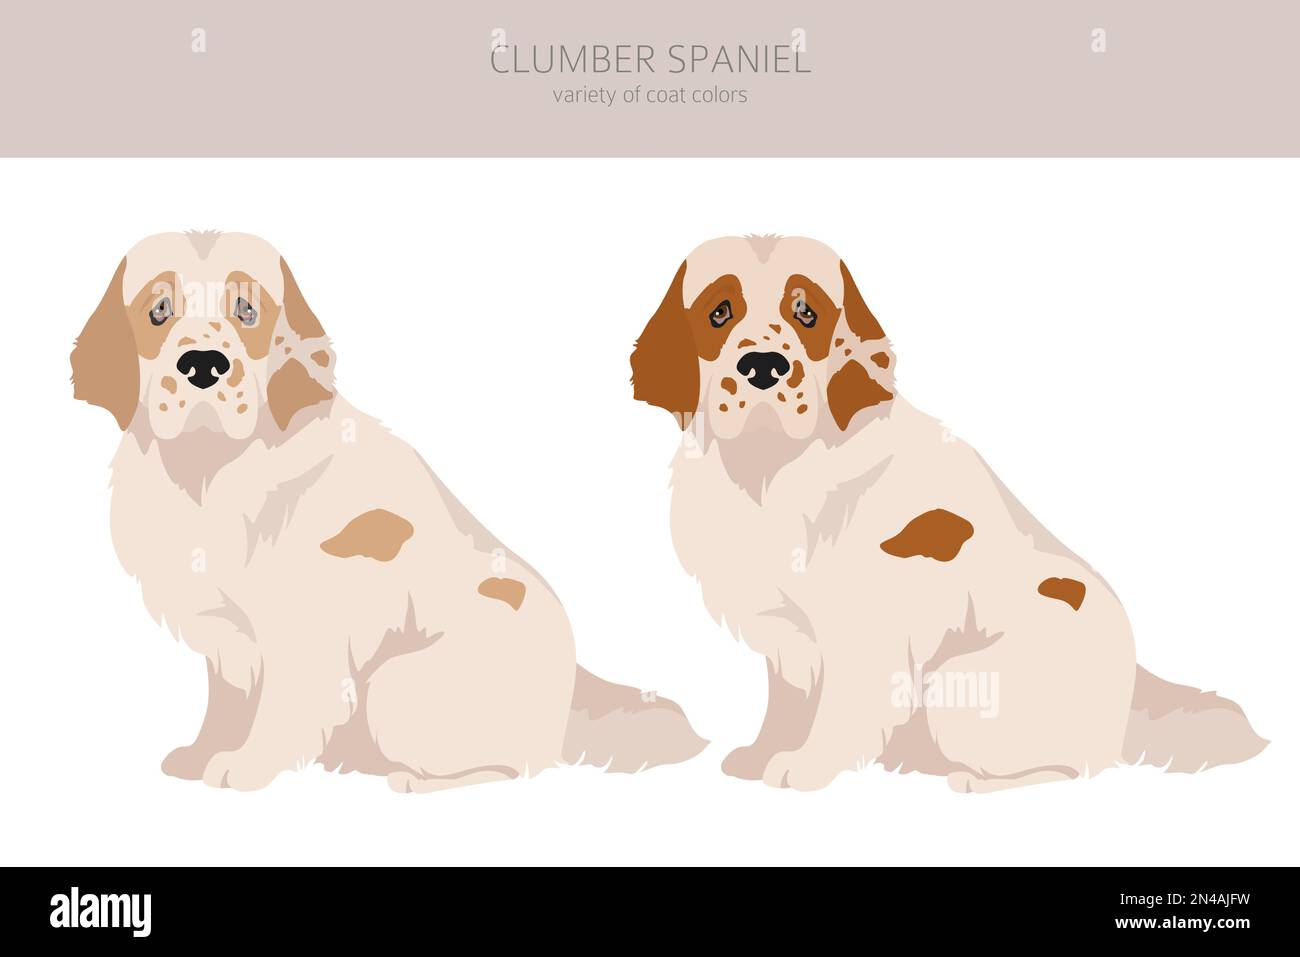 Clumber spaniel clipart. Different poses, coat colors set.  Vector illustration Stock Vector